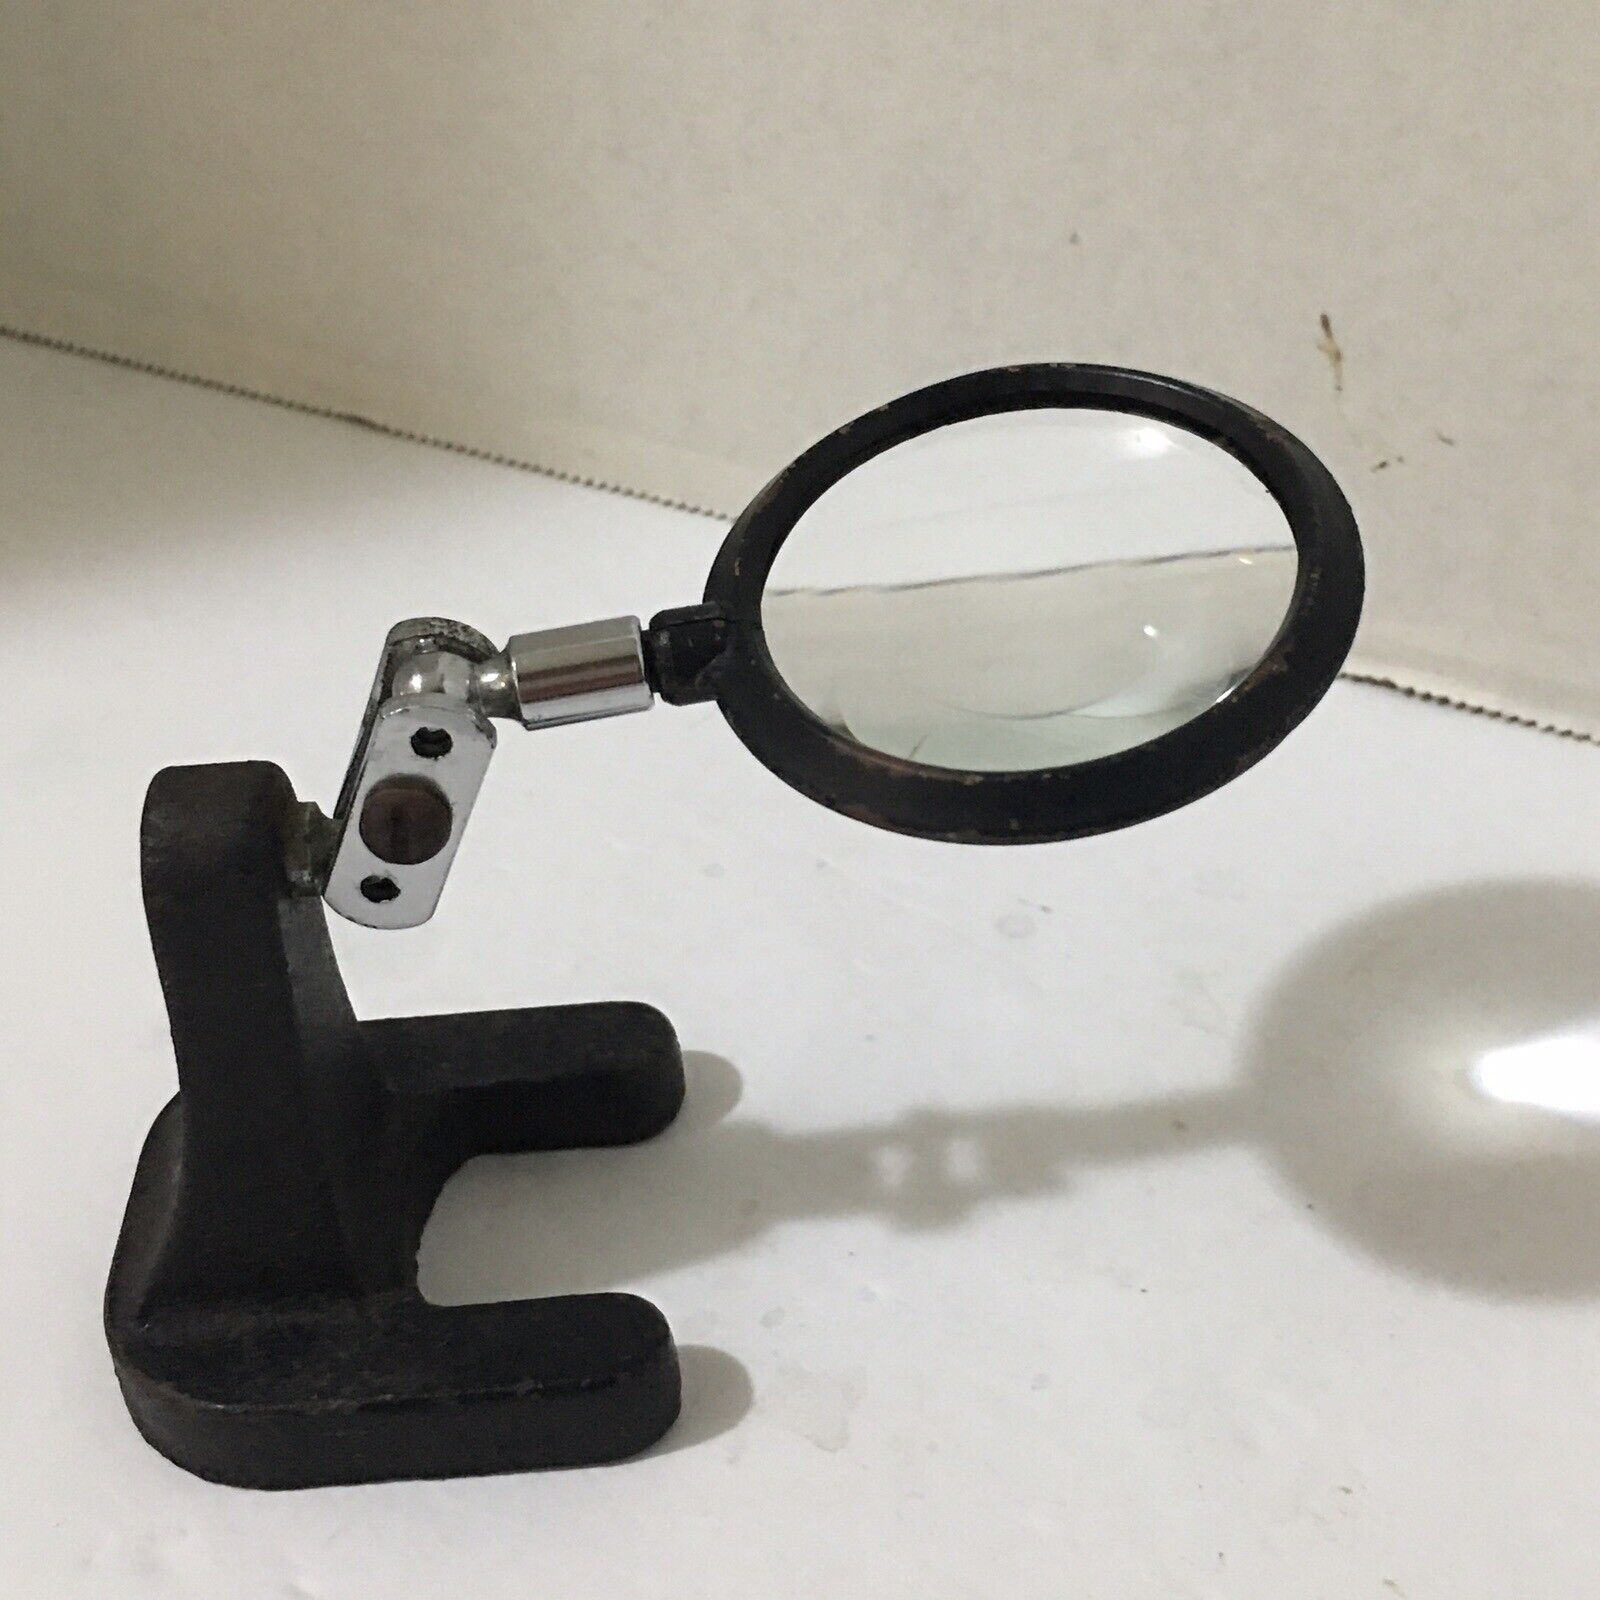 Vintage ATCO Articulated Desktop MAGNIFYING Glass Cast Iron Base US Made READ